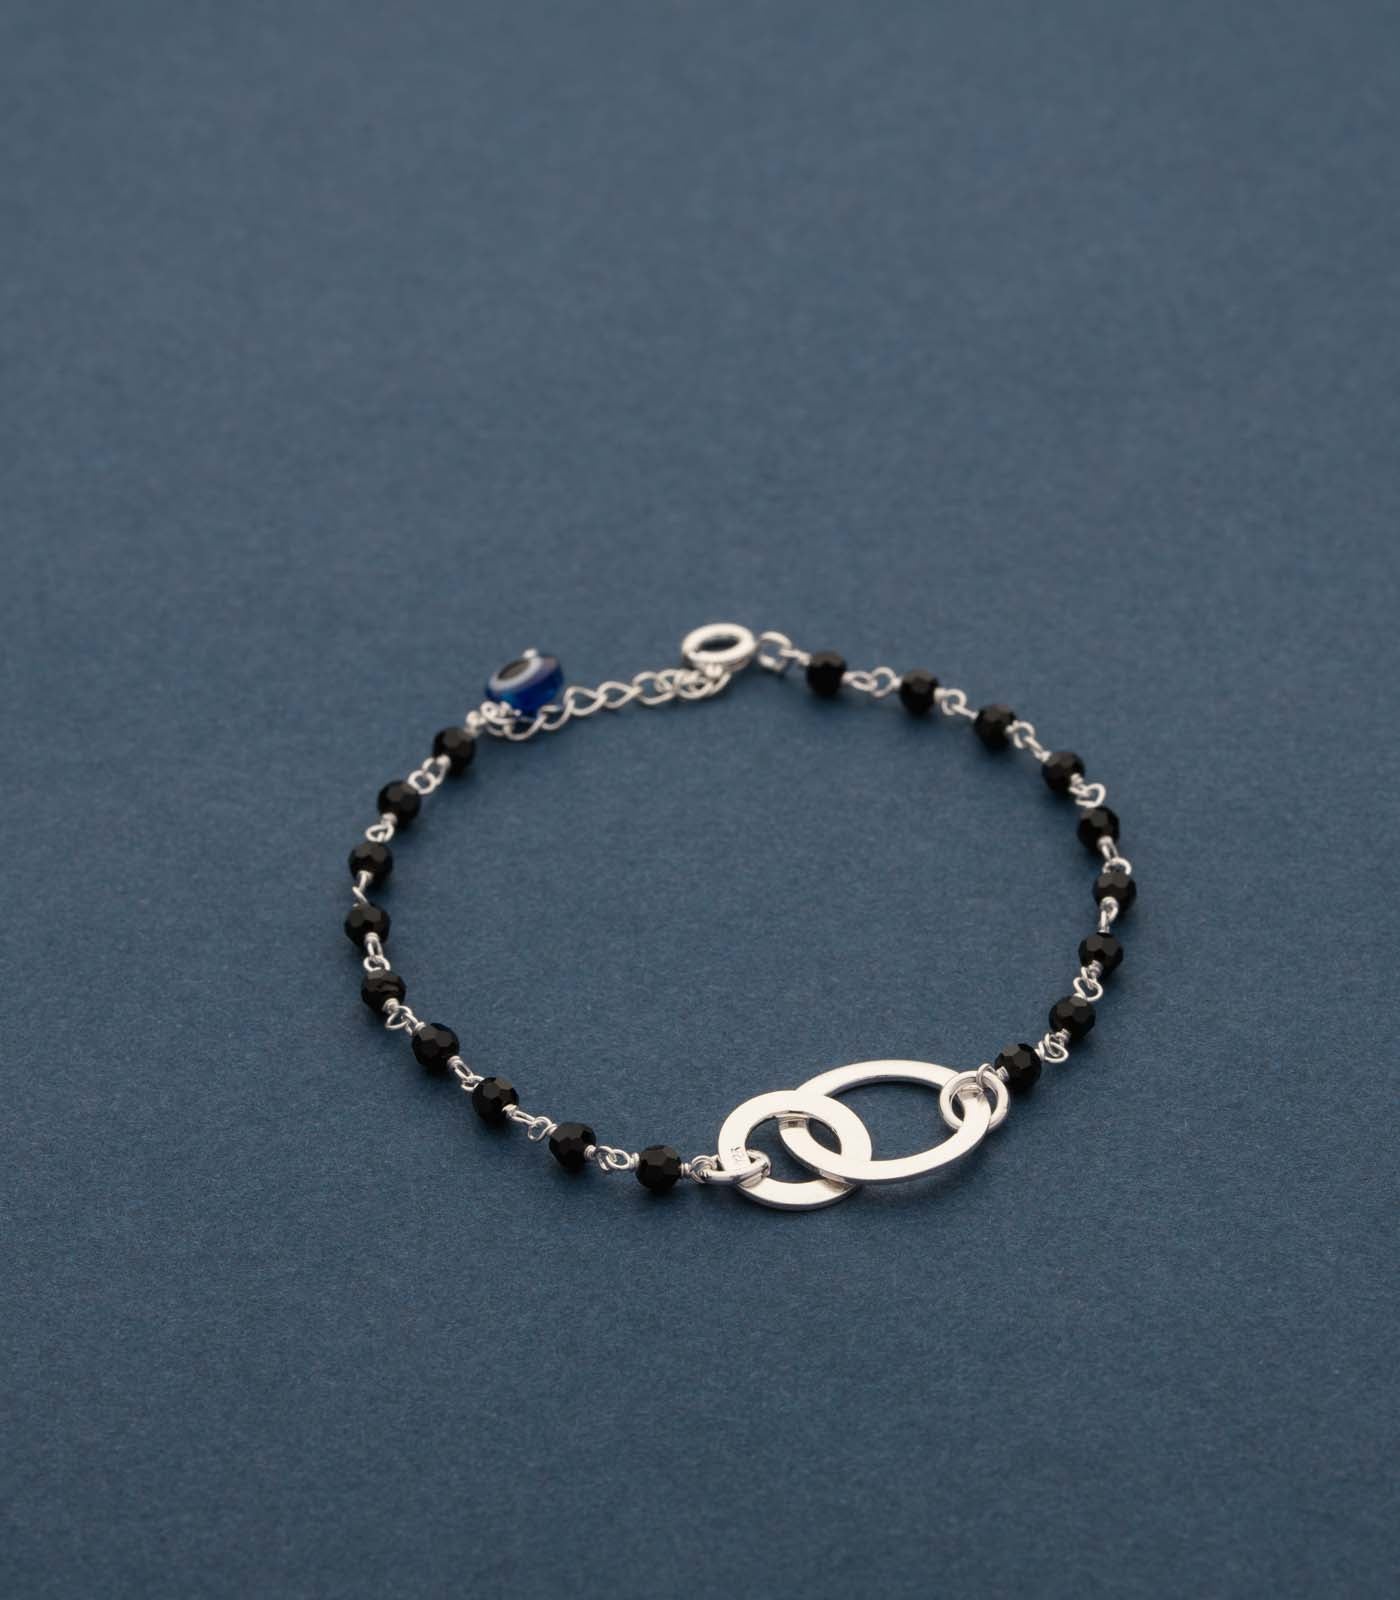 Connected With Love Bracelet (Silver)